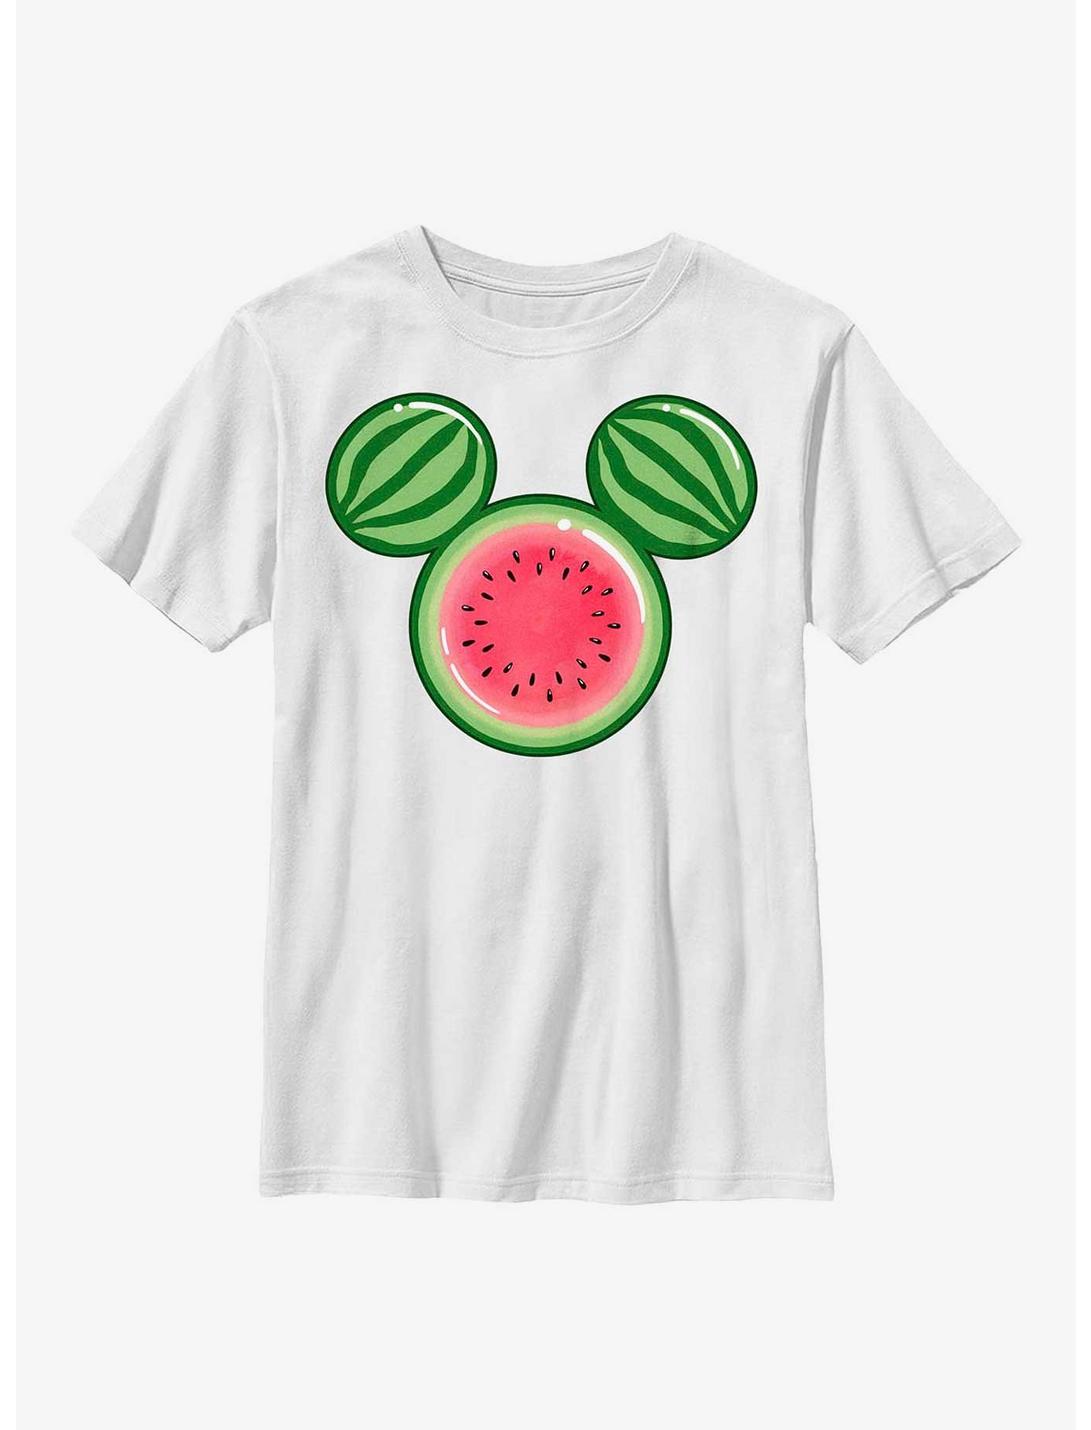 Disney Mickey Mouse Watermelon Ears Youth T-Shirt, WHITE, hi-res